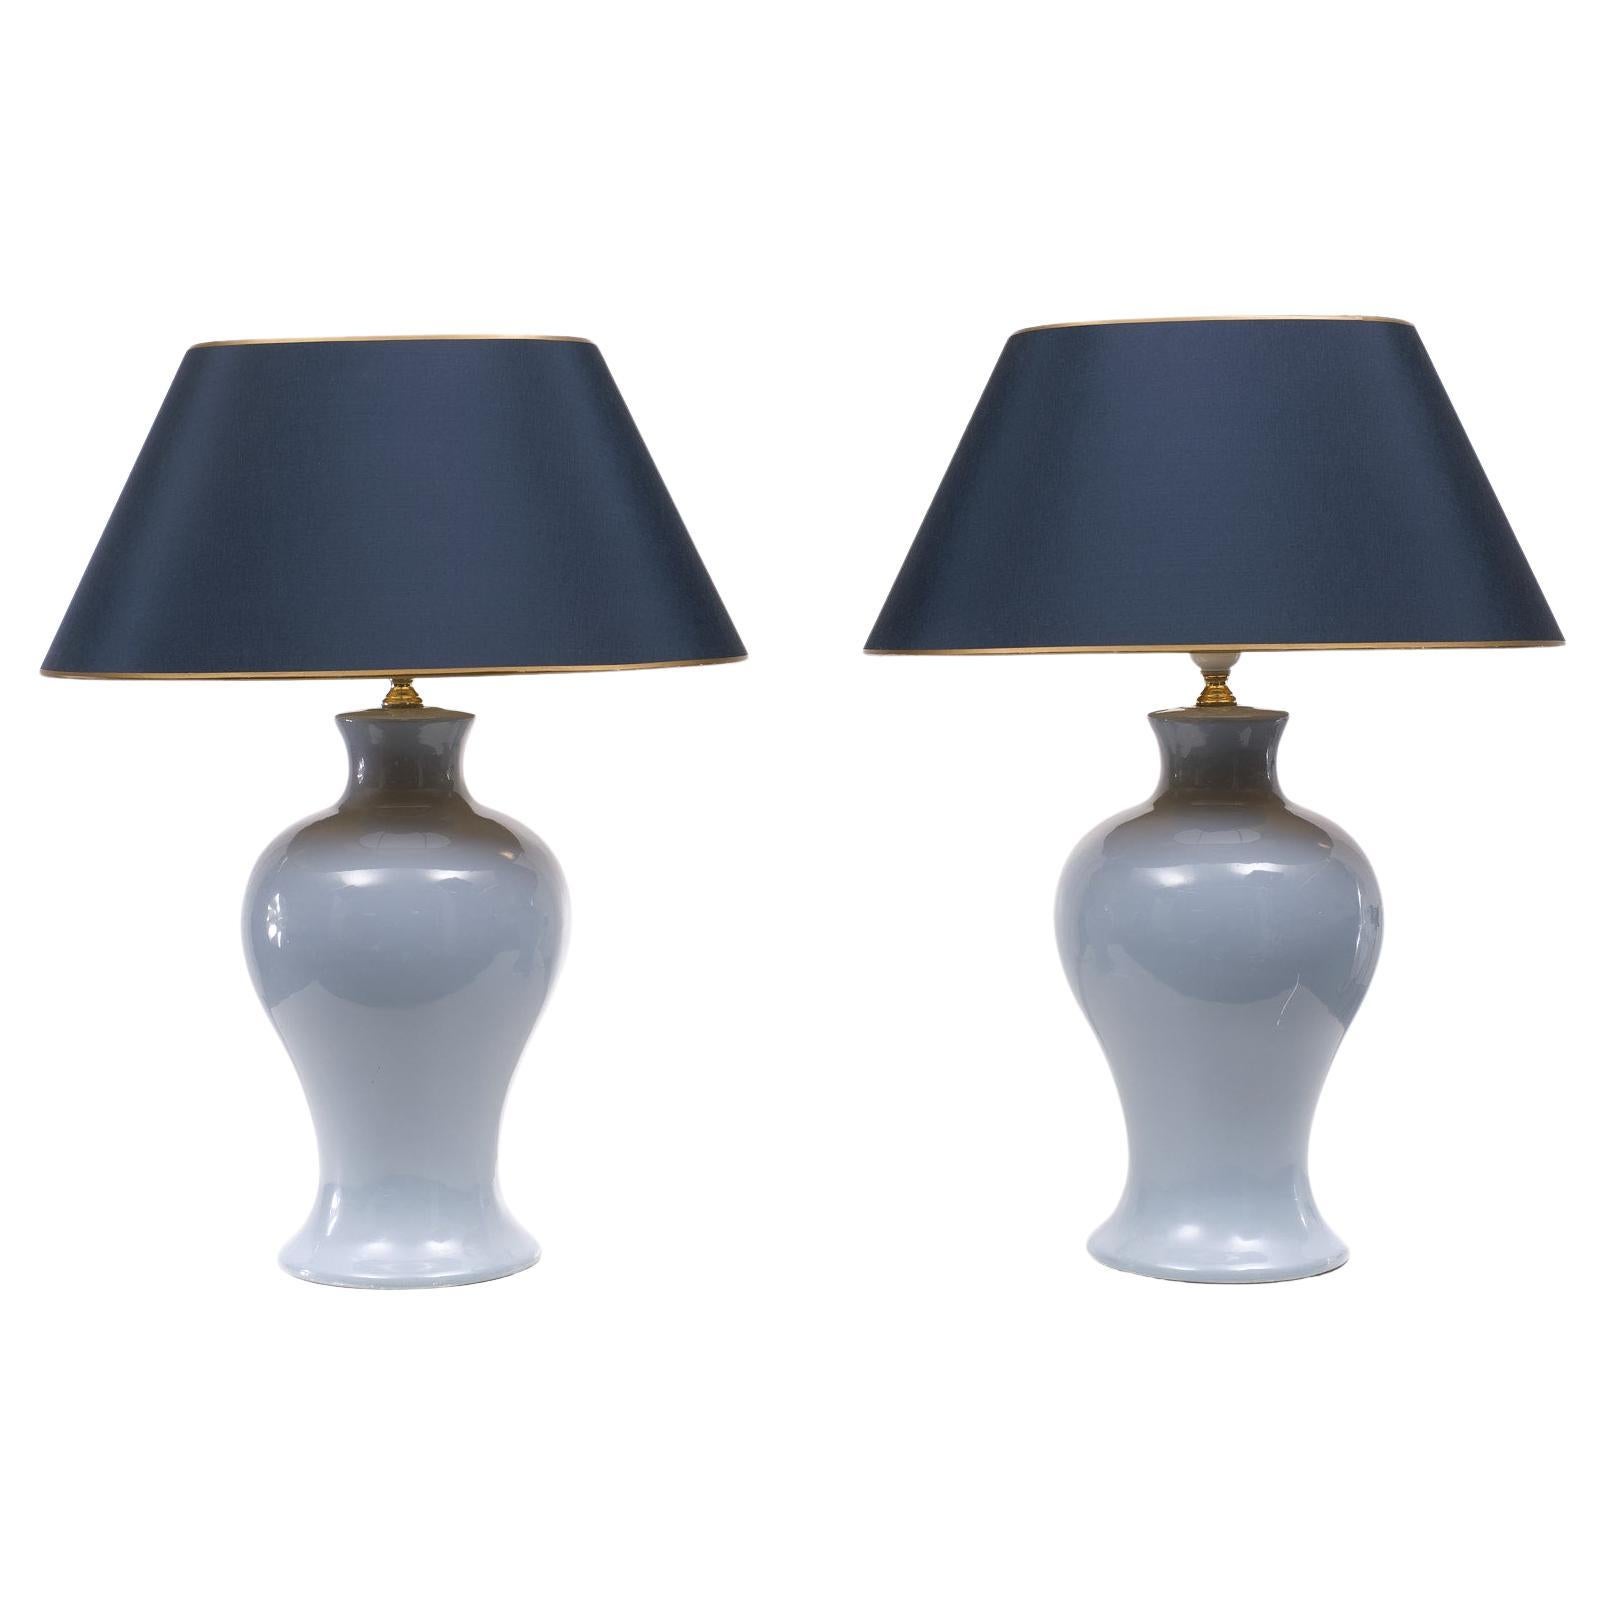 Classic Regency Table Lamps, 1970s, France For Sale